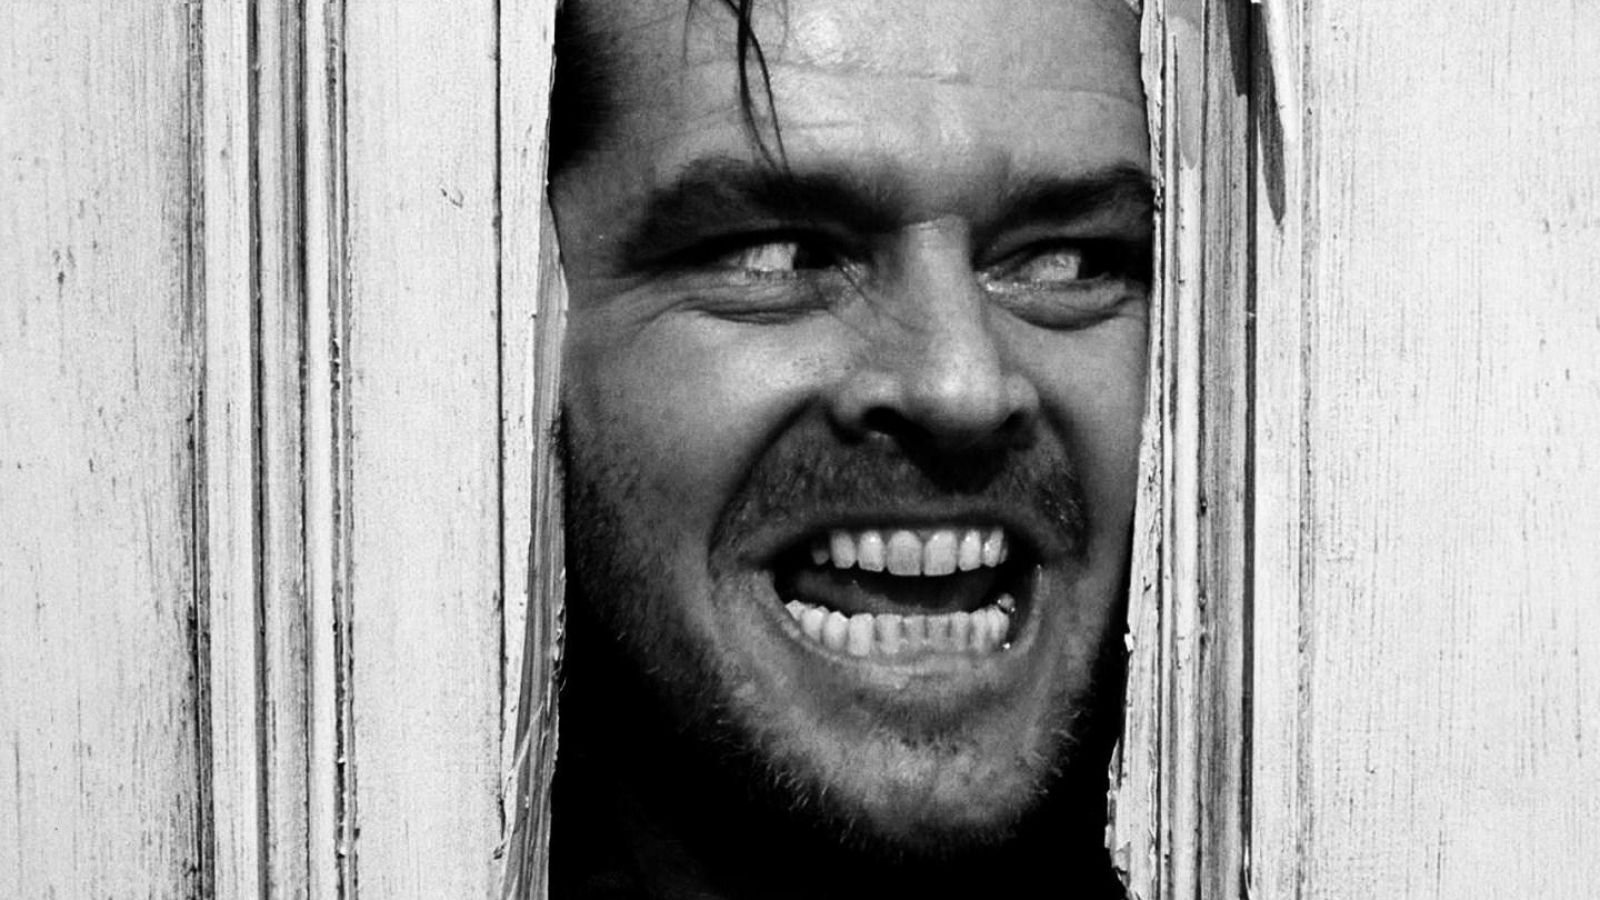 The Shining Sequel Movie ‘Doctor Sleep’ In The Making